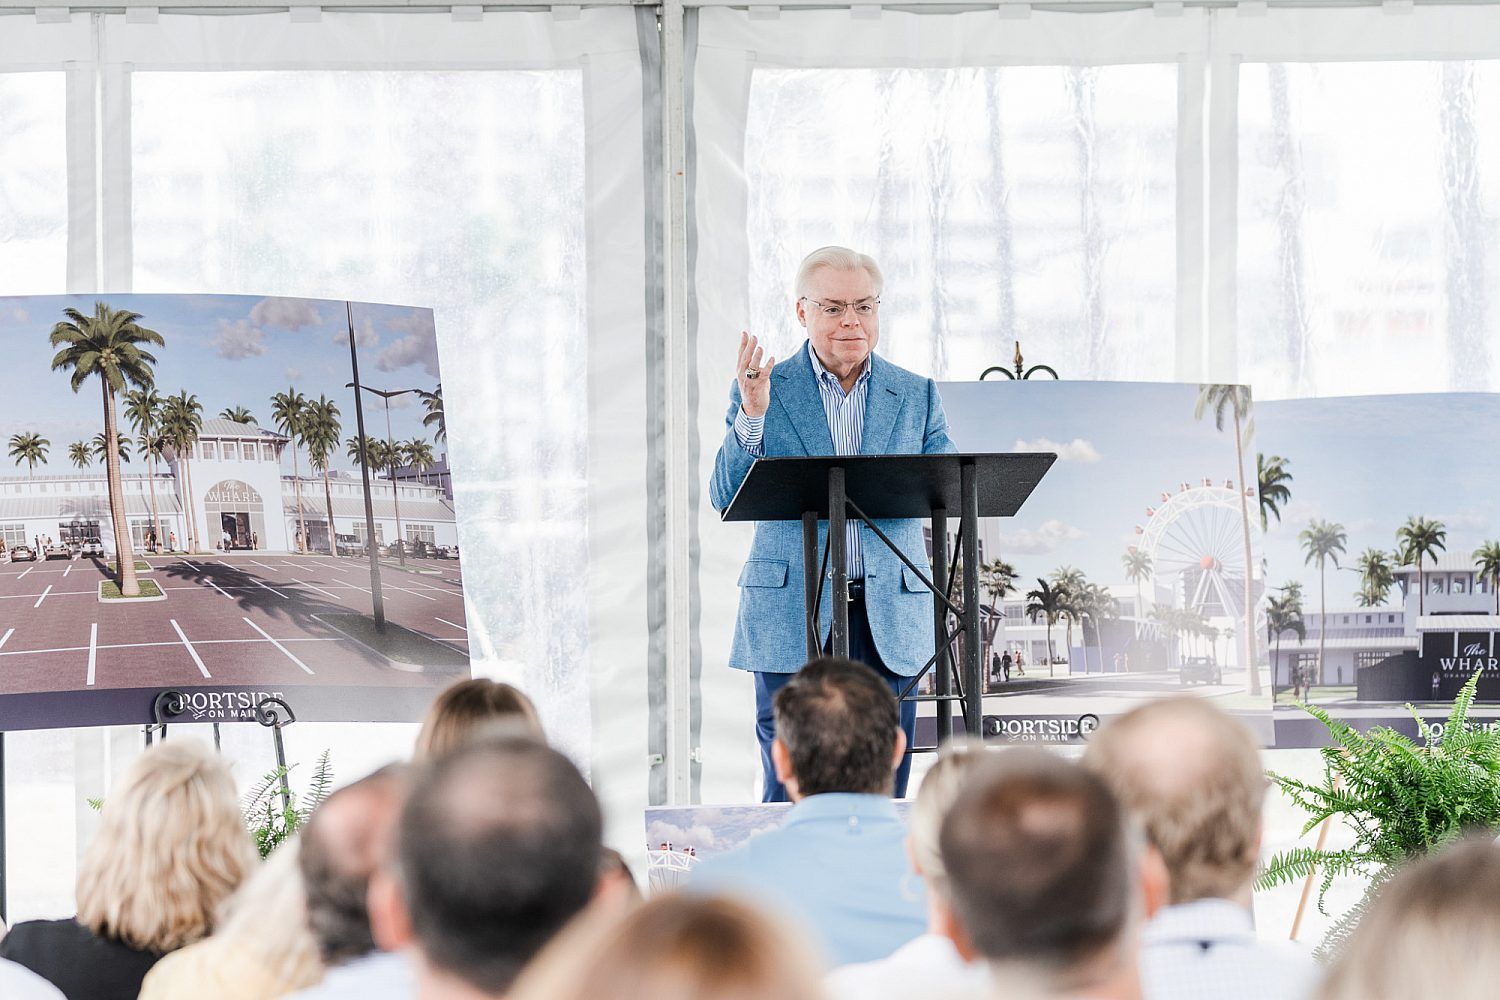 Art Favre, the owner of The Wharf, shared his vision for the new development.